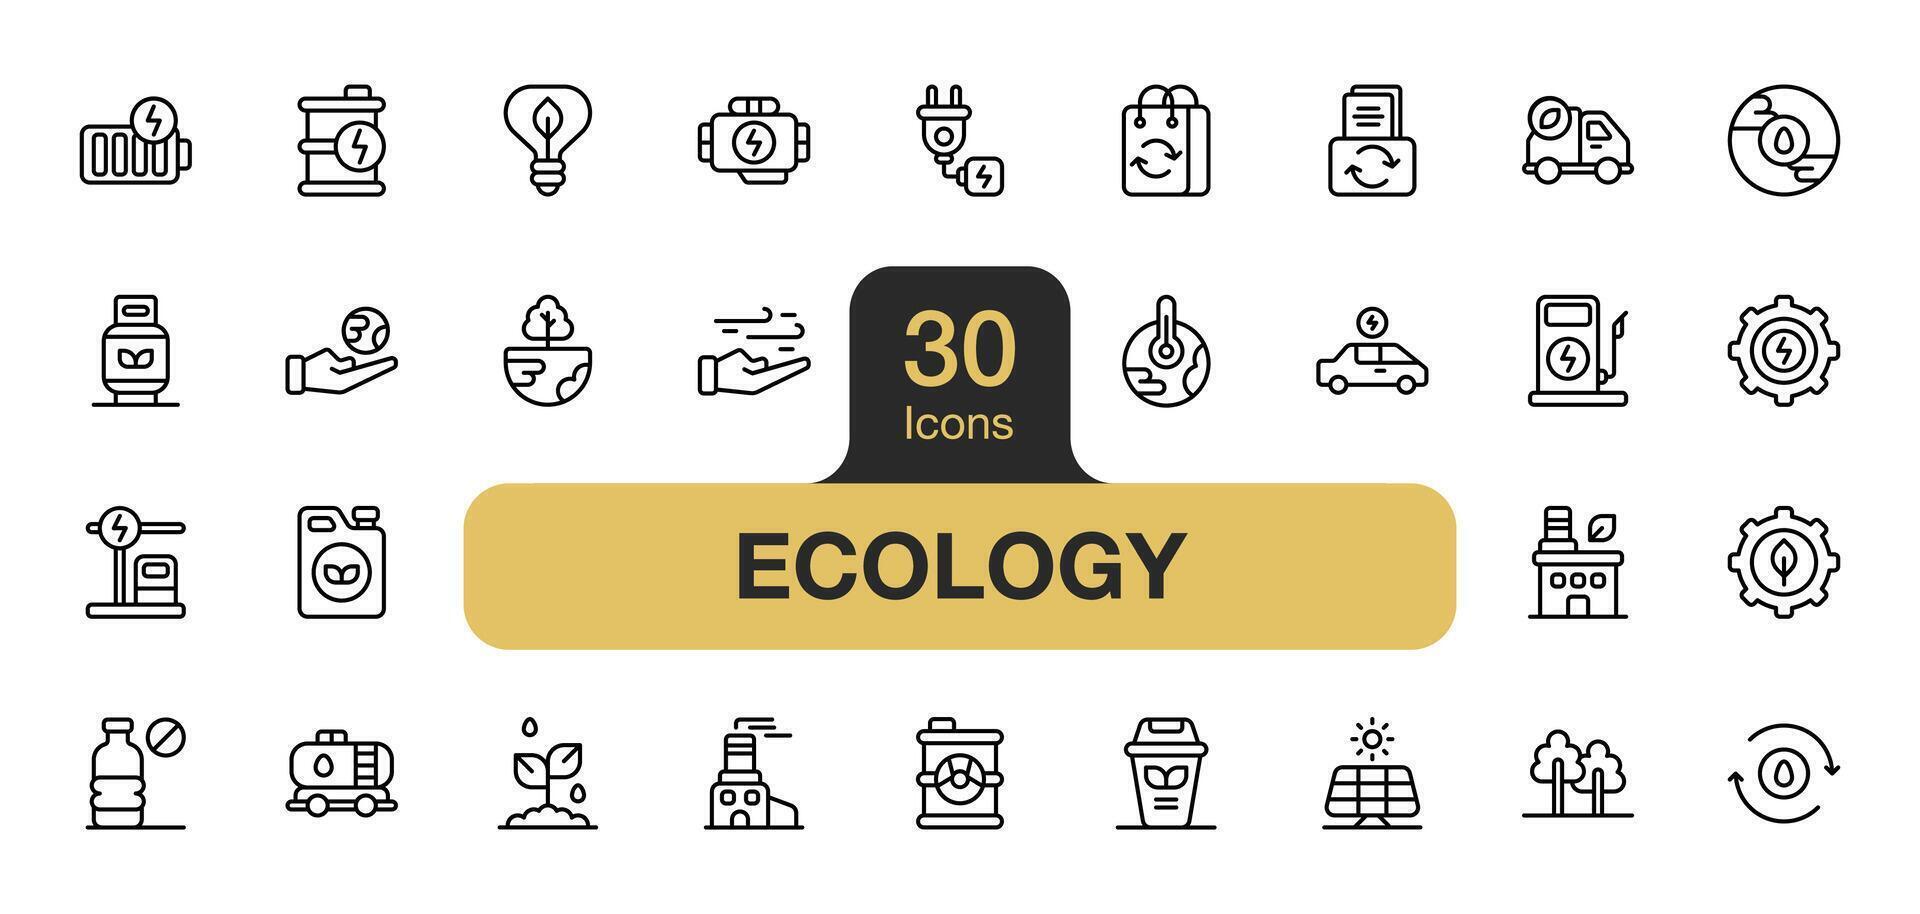 Set of 30 Ecology icon element sets. Includes nature, eco, environment, recycle, go green, ecosystem, and More. Outline icons vector collection.